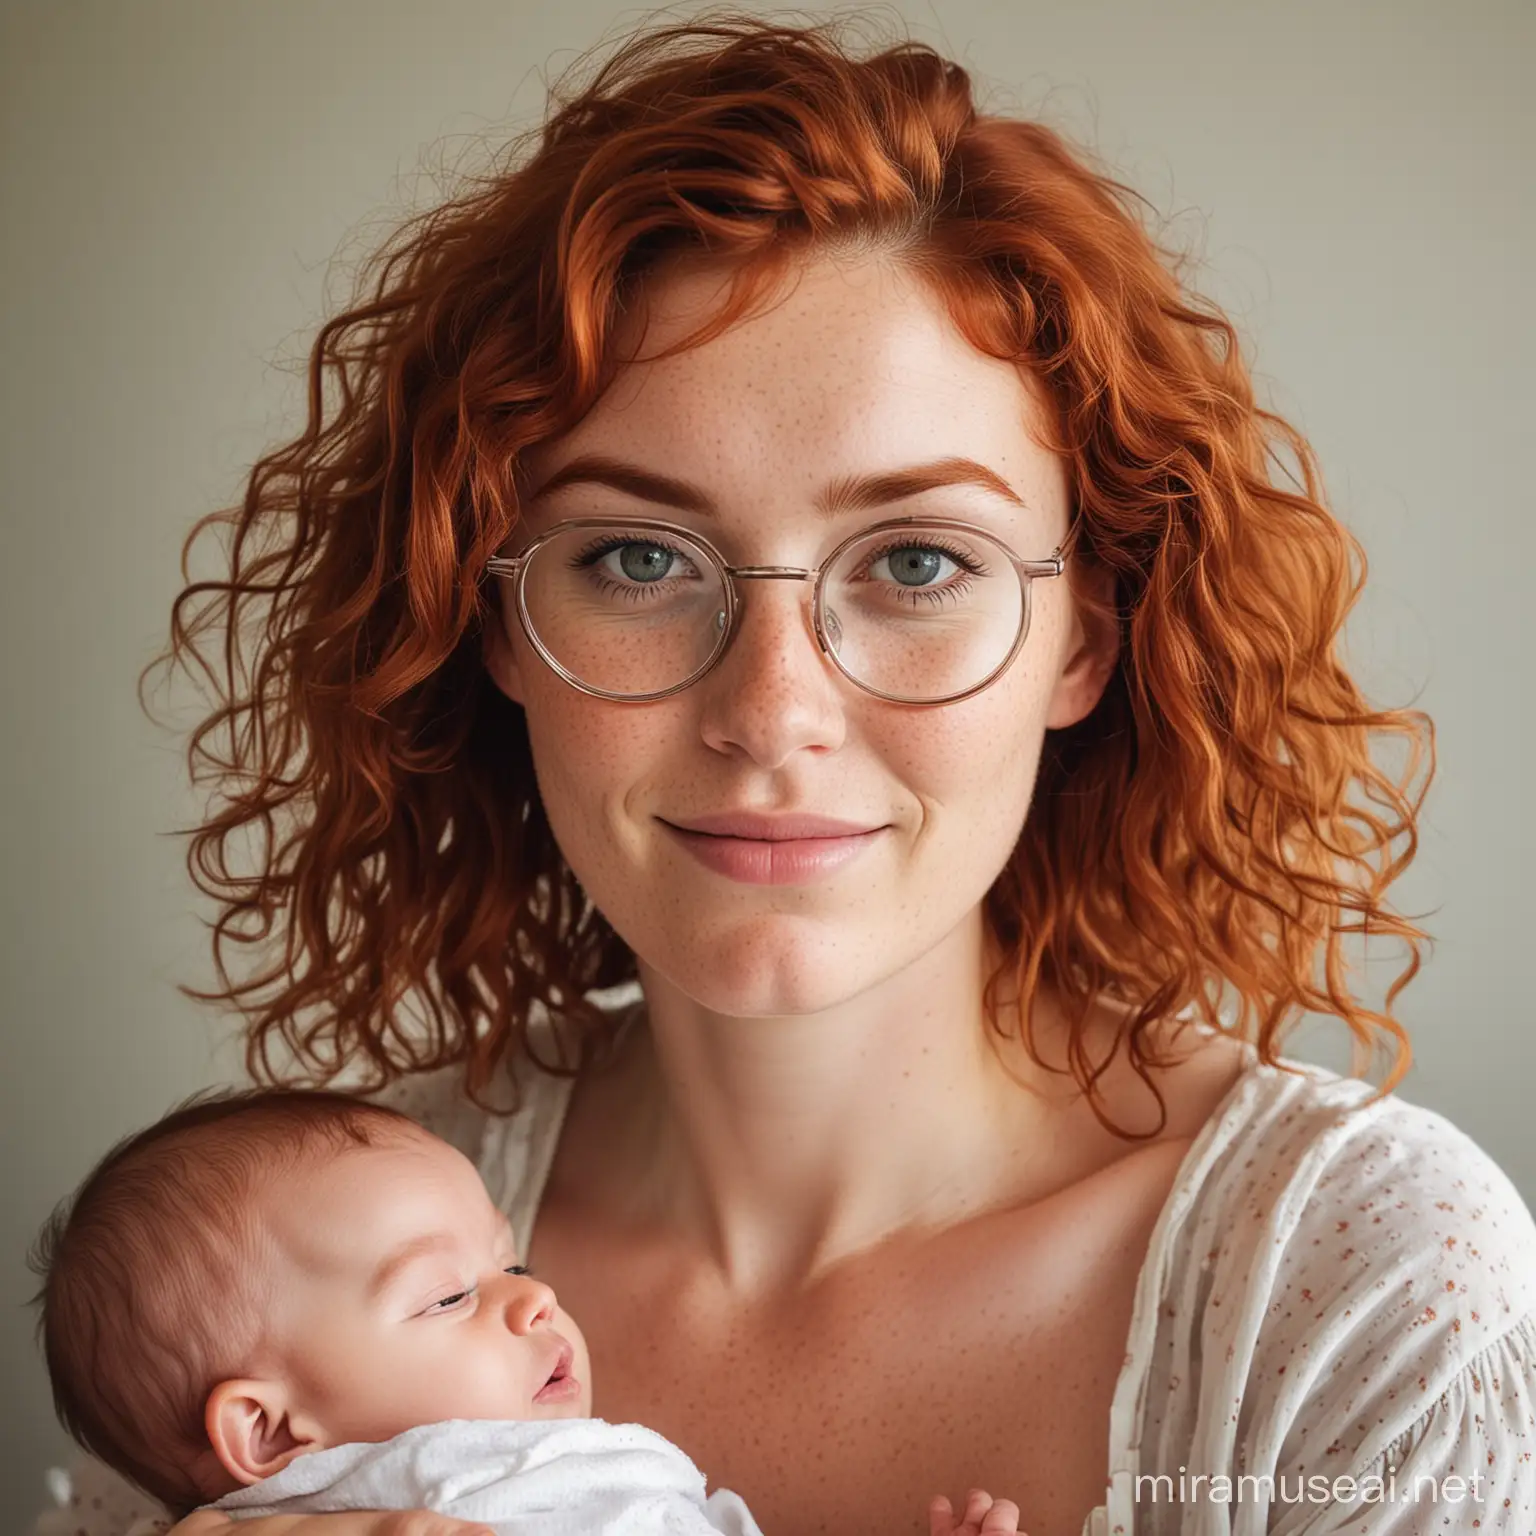 A woman in her 20s with glasses and freckles and wavy red hair breastfeeding a baby